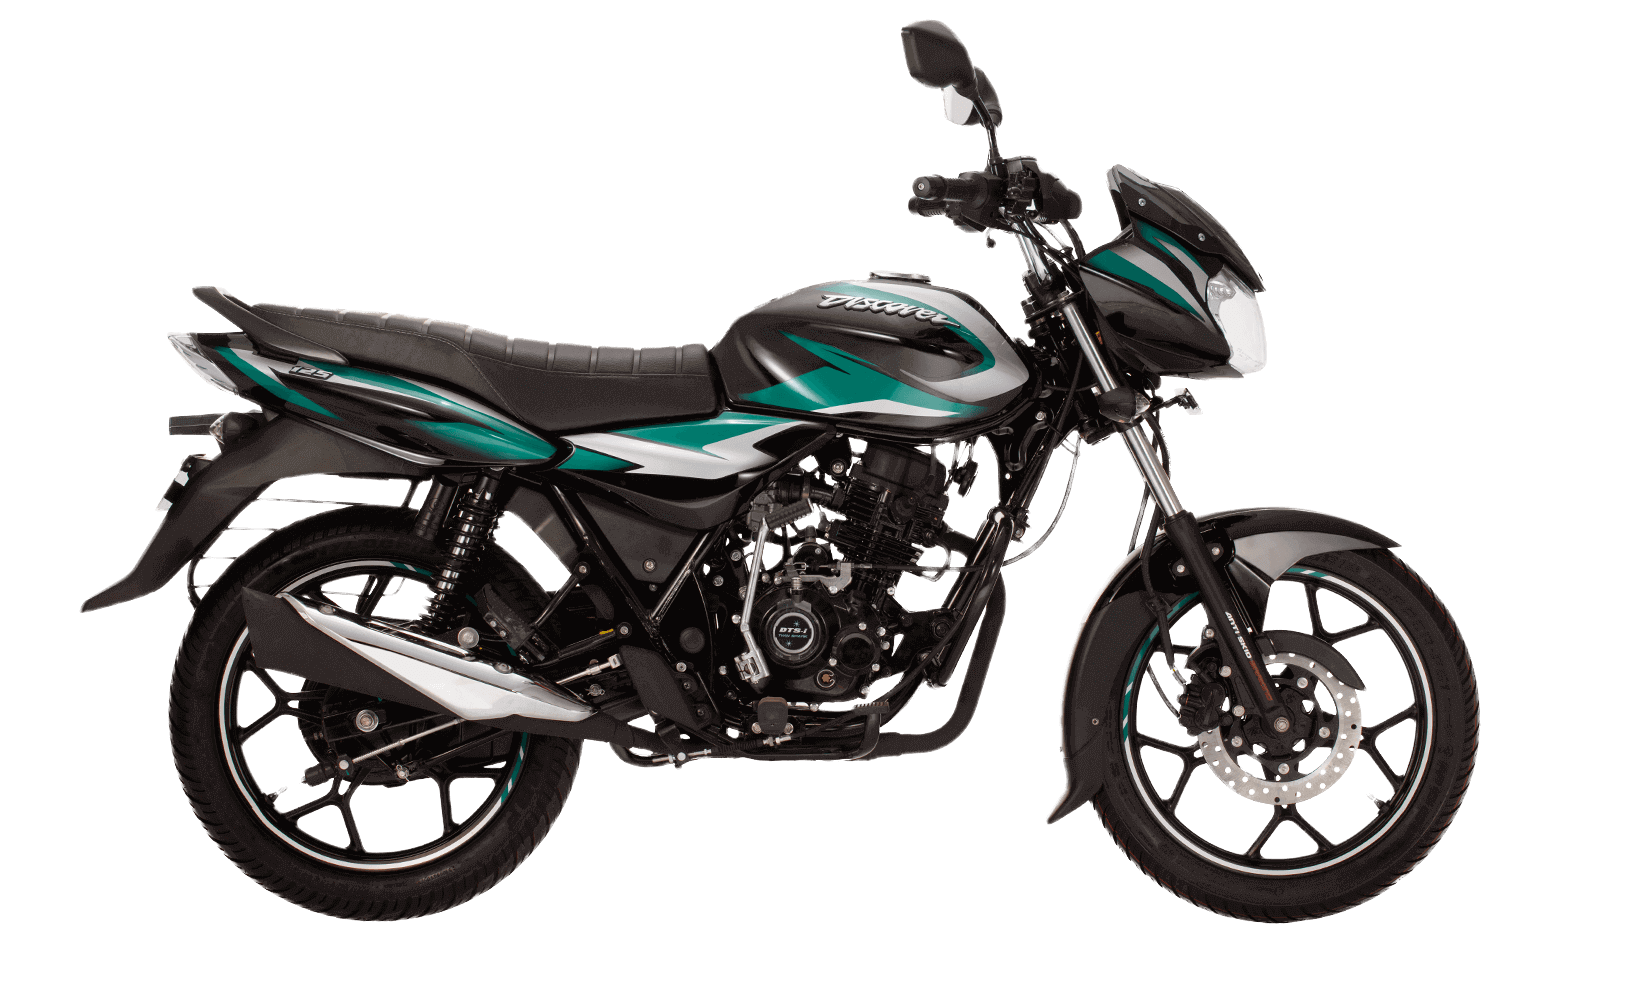 Black and green color New Model Bajaj Discover 125cc Motorcycle Price